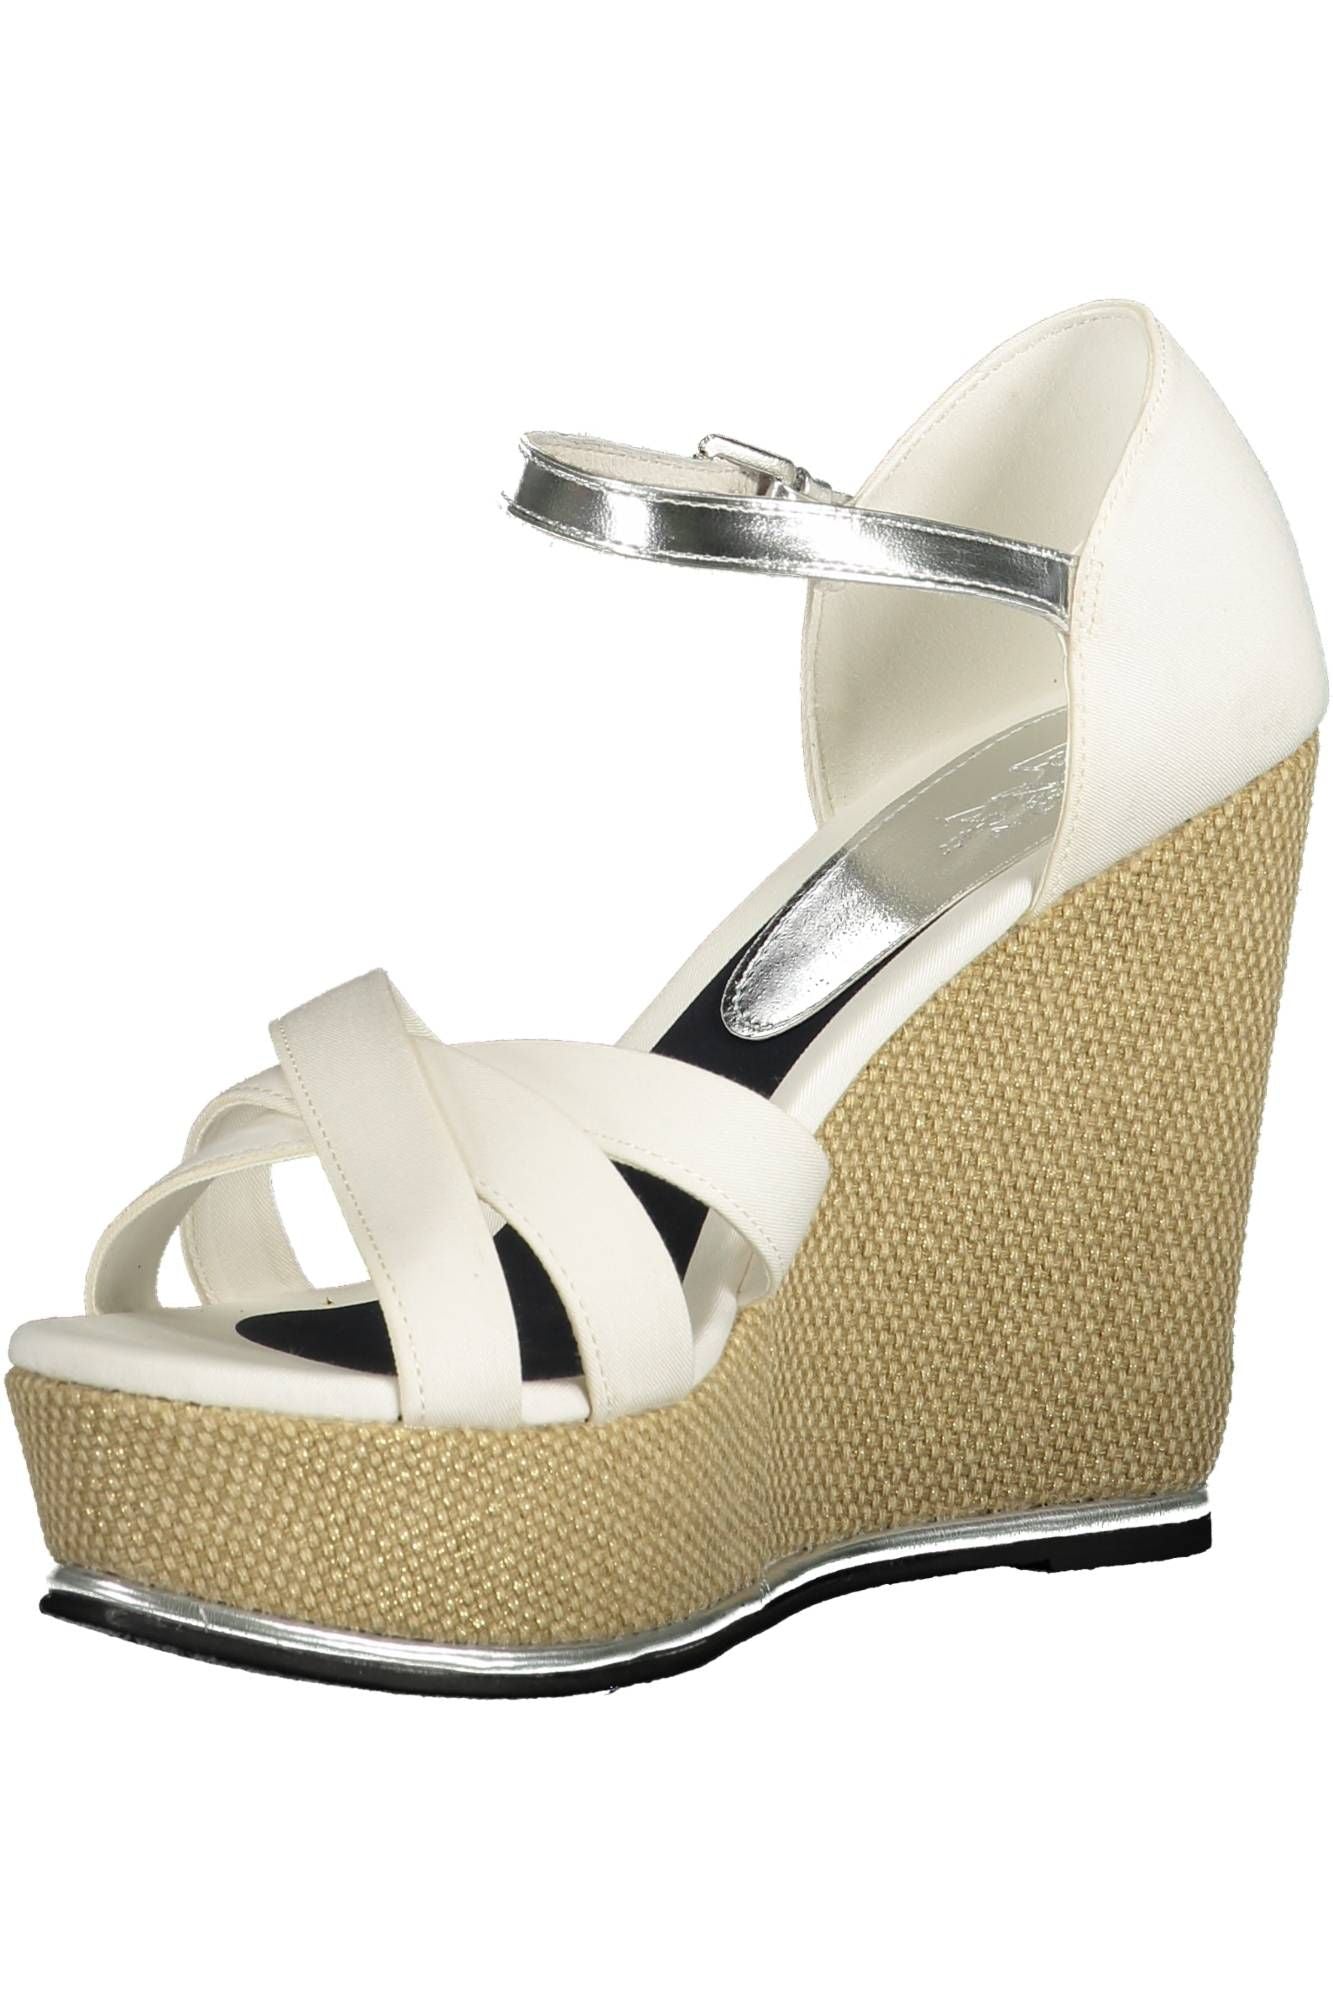 Chic Ankle Strap Wedge Sandals in White